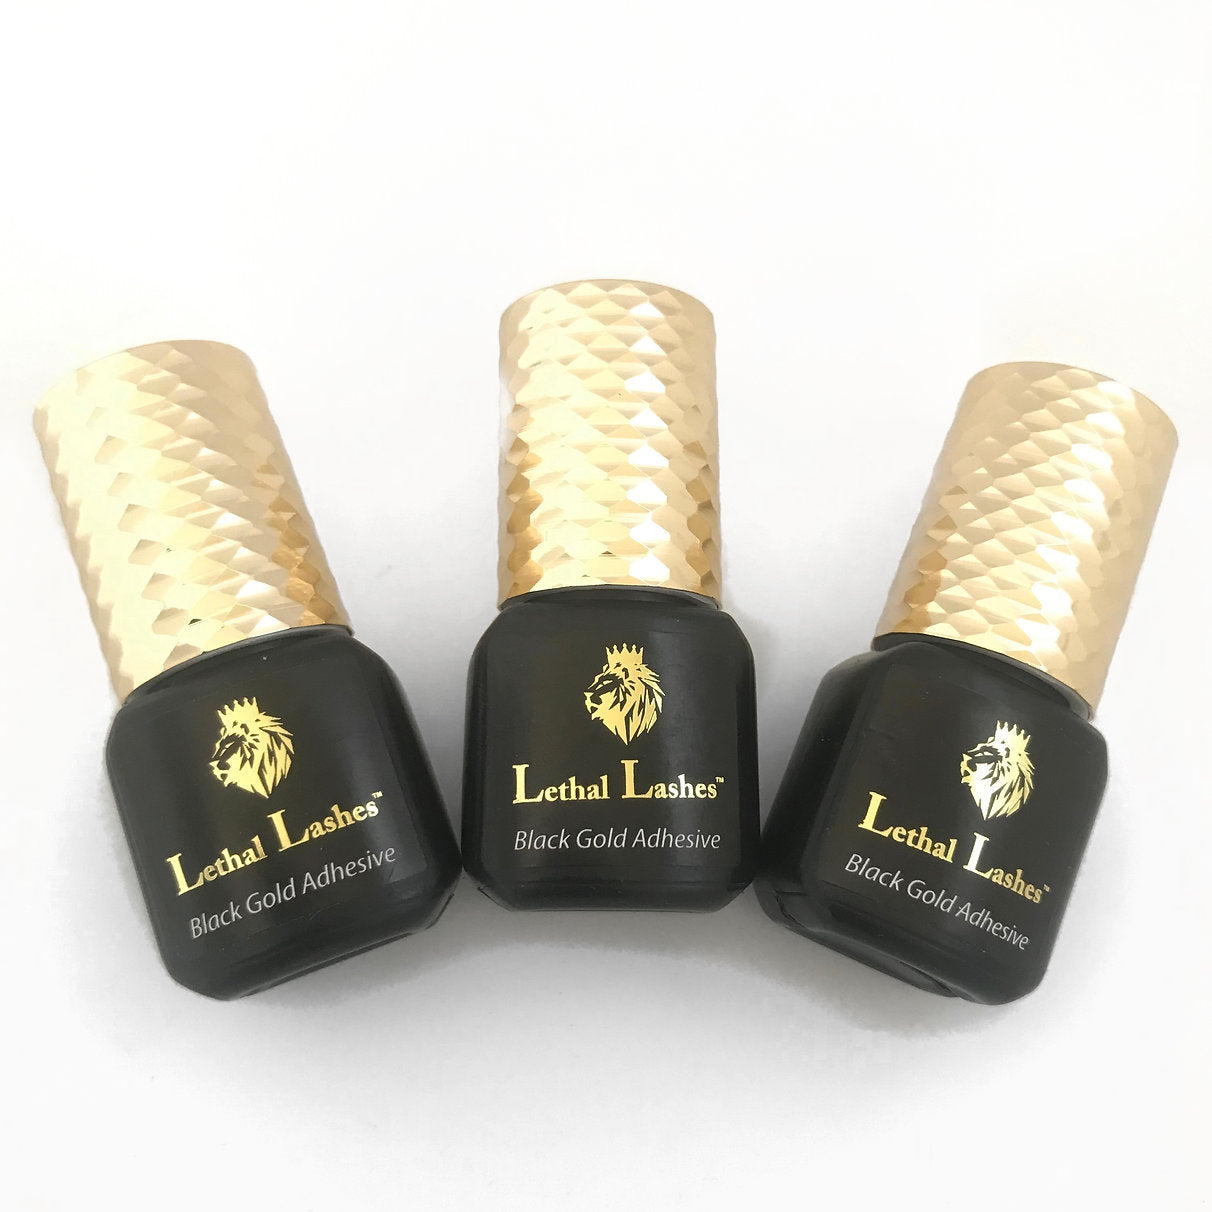 Lethal Lashes Black Gold Adhesive